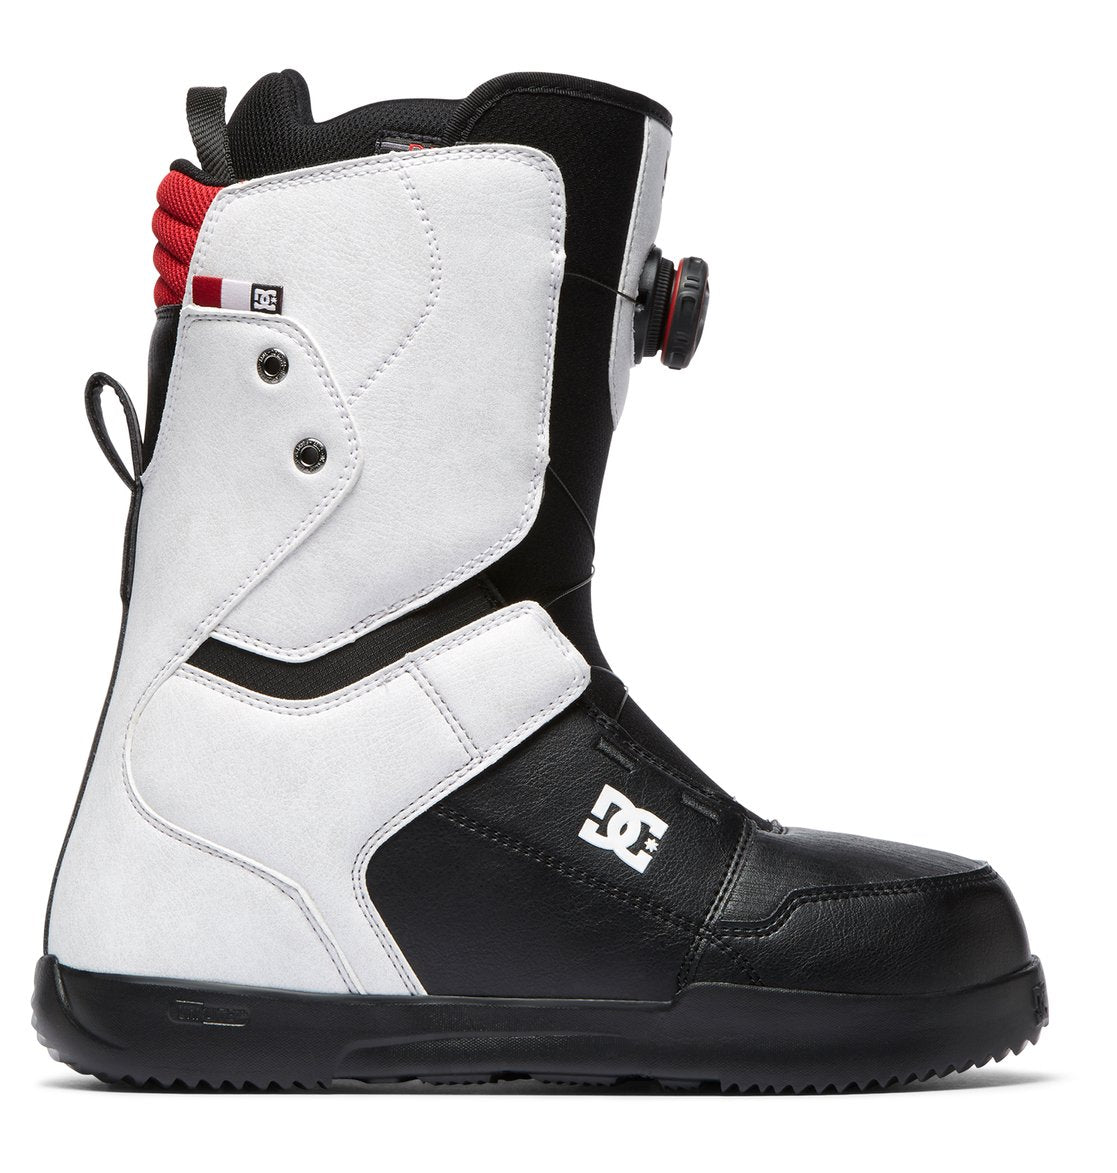 verontreiniging Rechtsaf Continentaal DC Shoes Mens Scout BOA Snowboard Boots ADYO100032